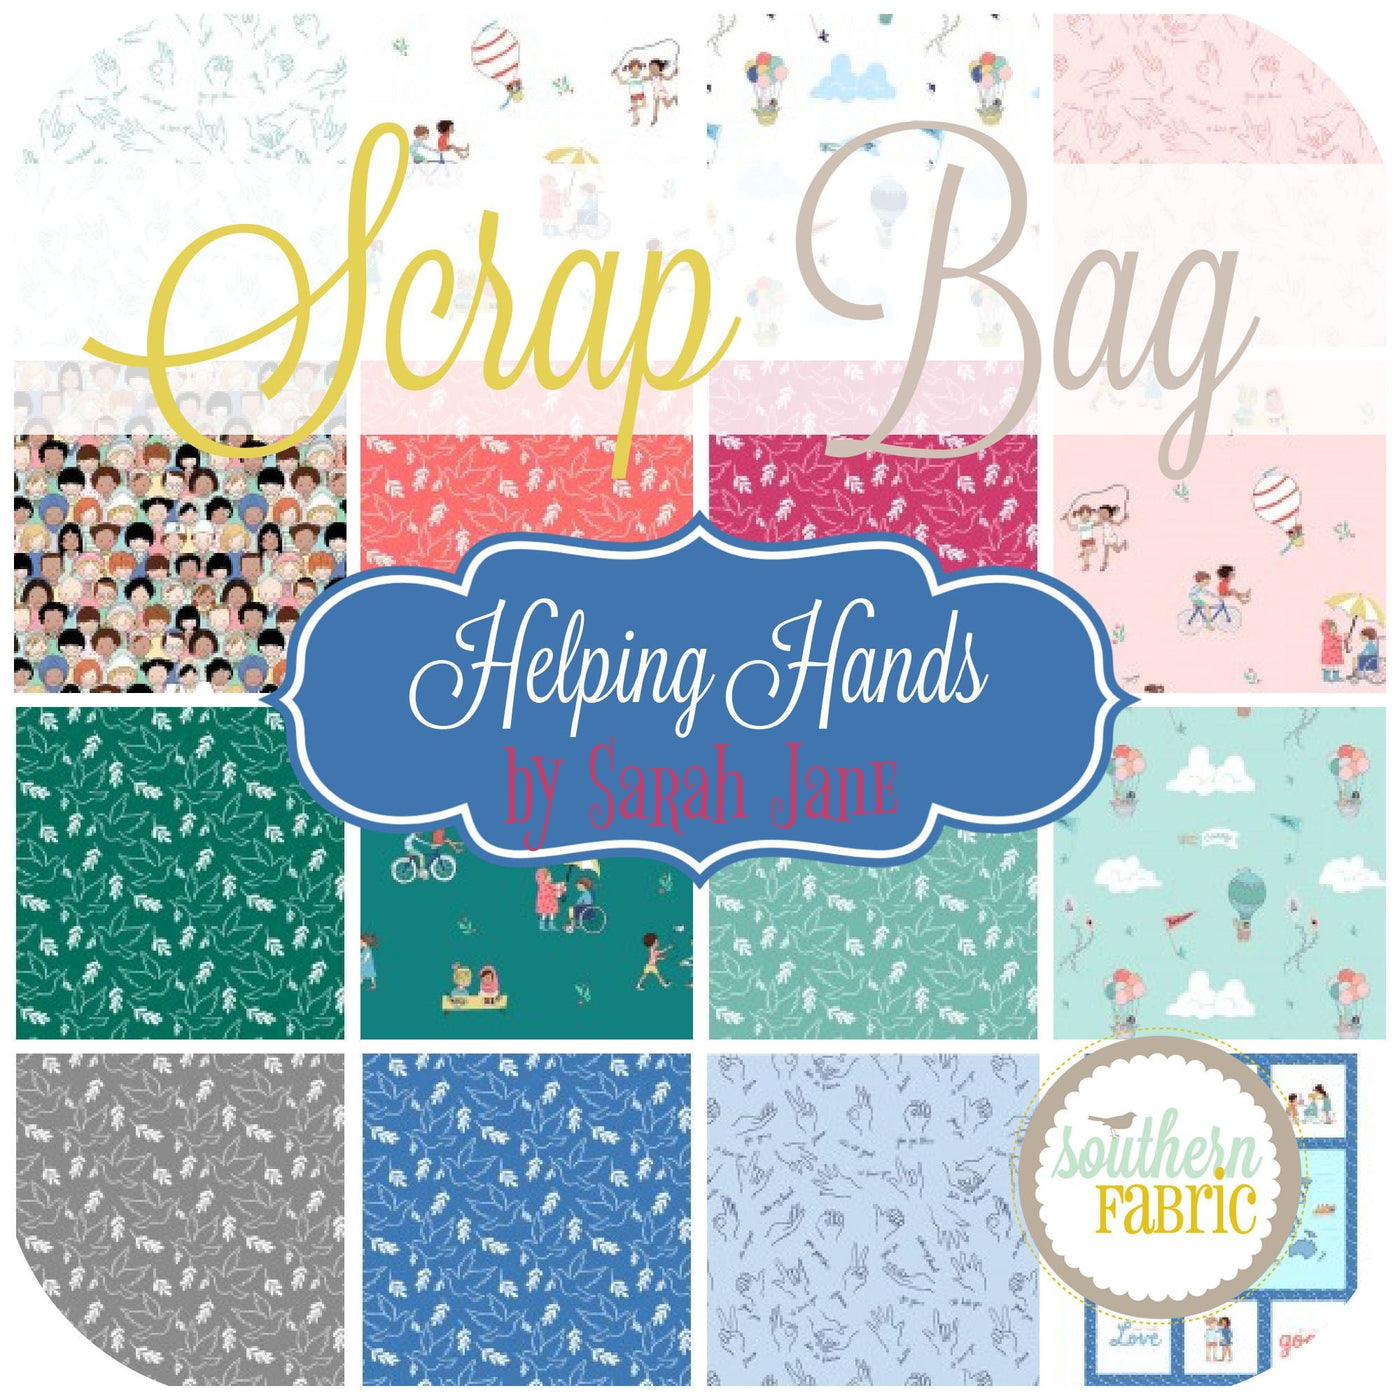 Helping Hands Scrap Bag (approx 2 yards) by Sarah Jane for Michael Miller (SJ.HH.SB)